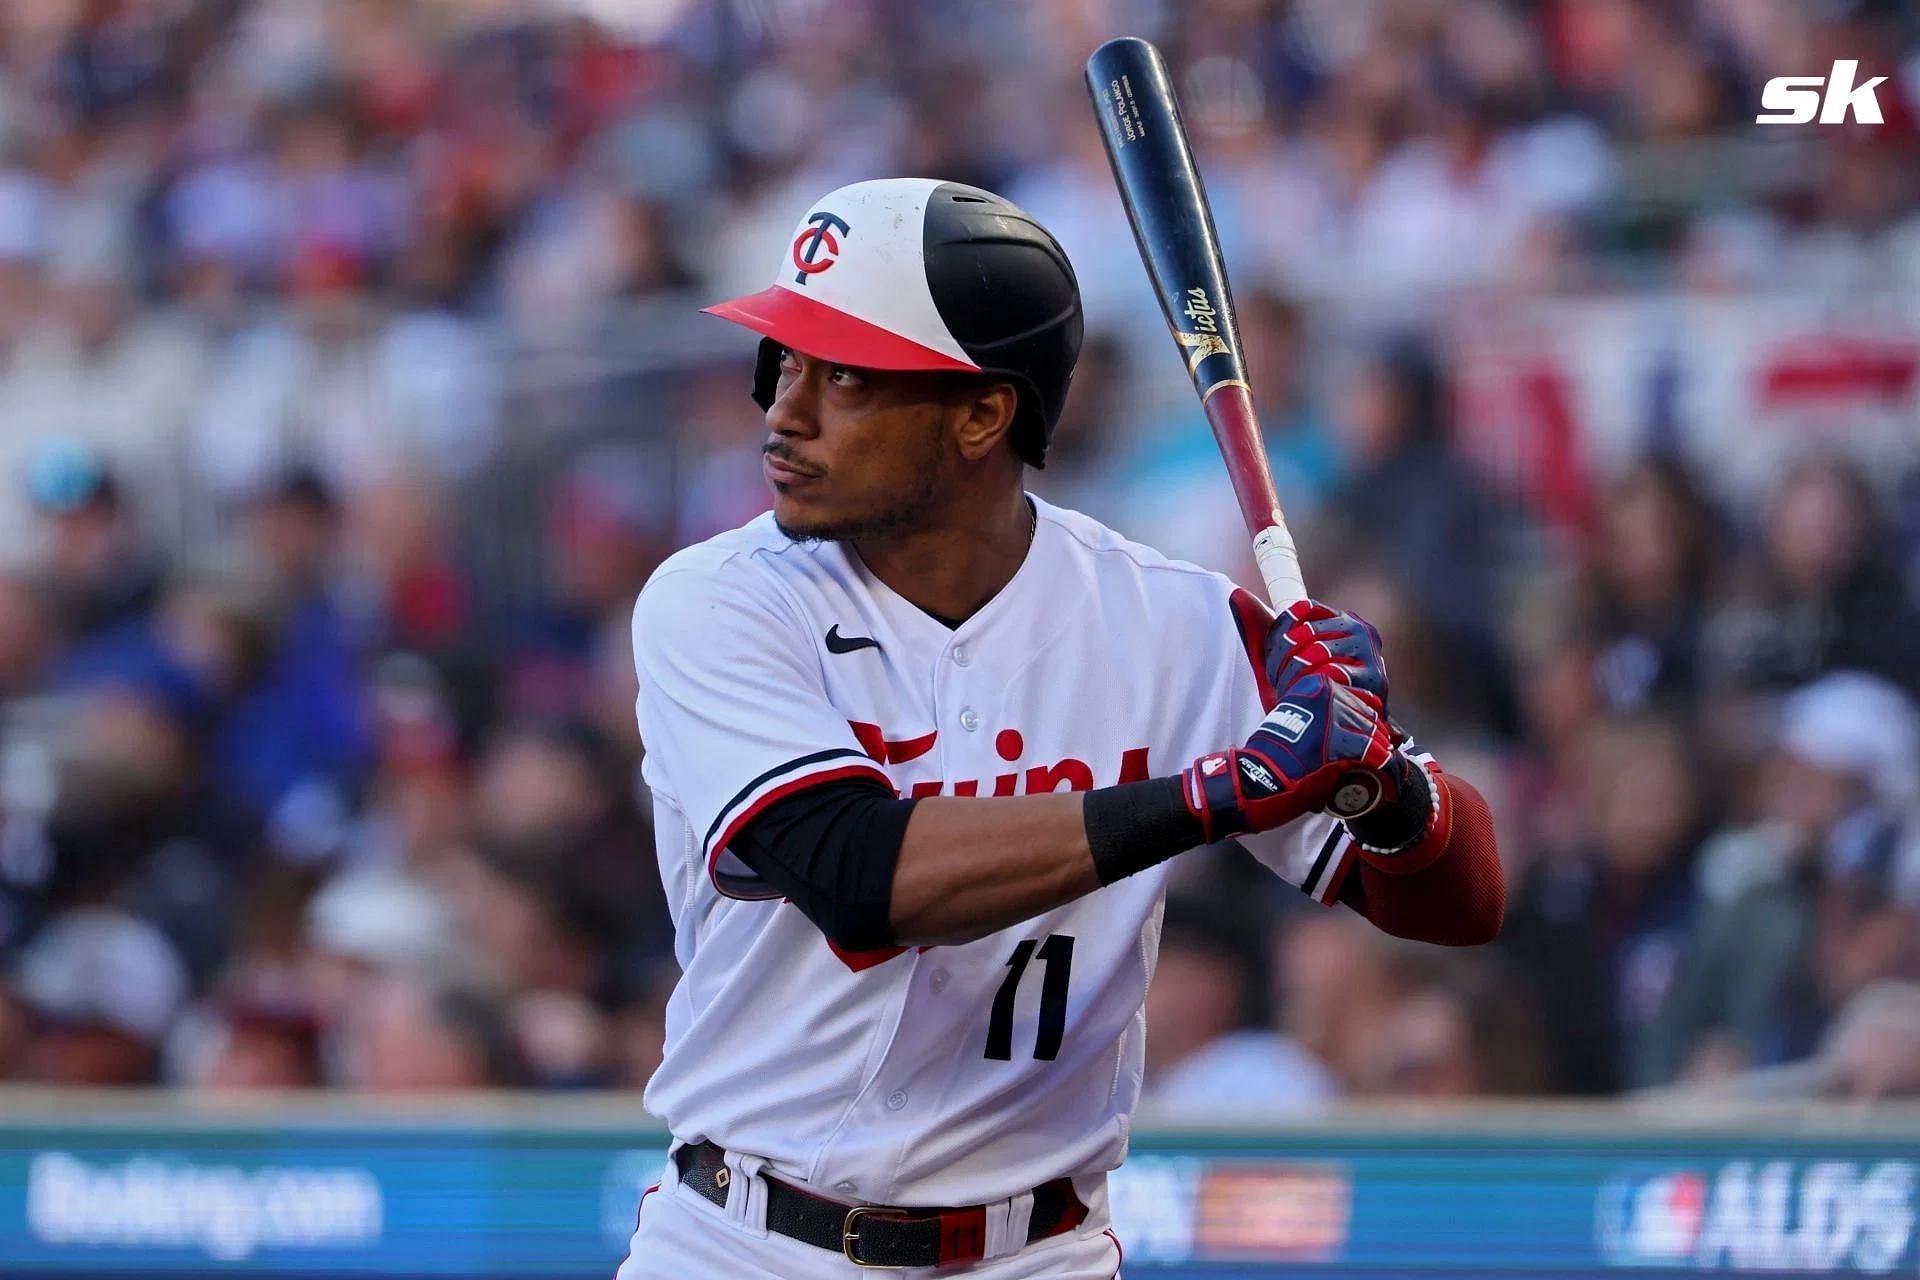 Seattle Mariners identifies Polanco as a perfect fit